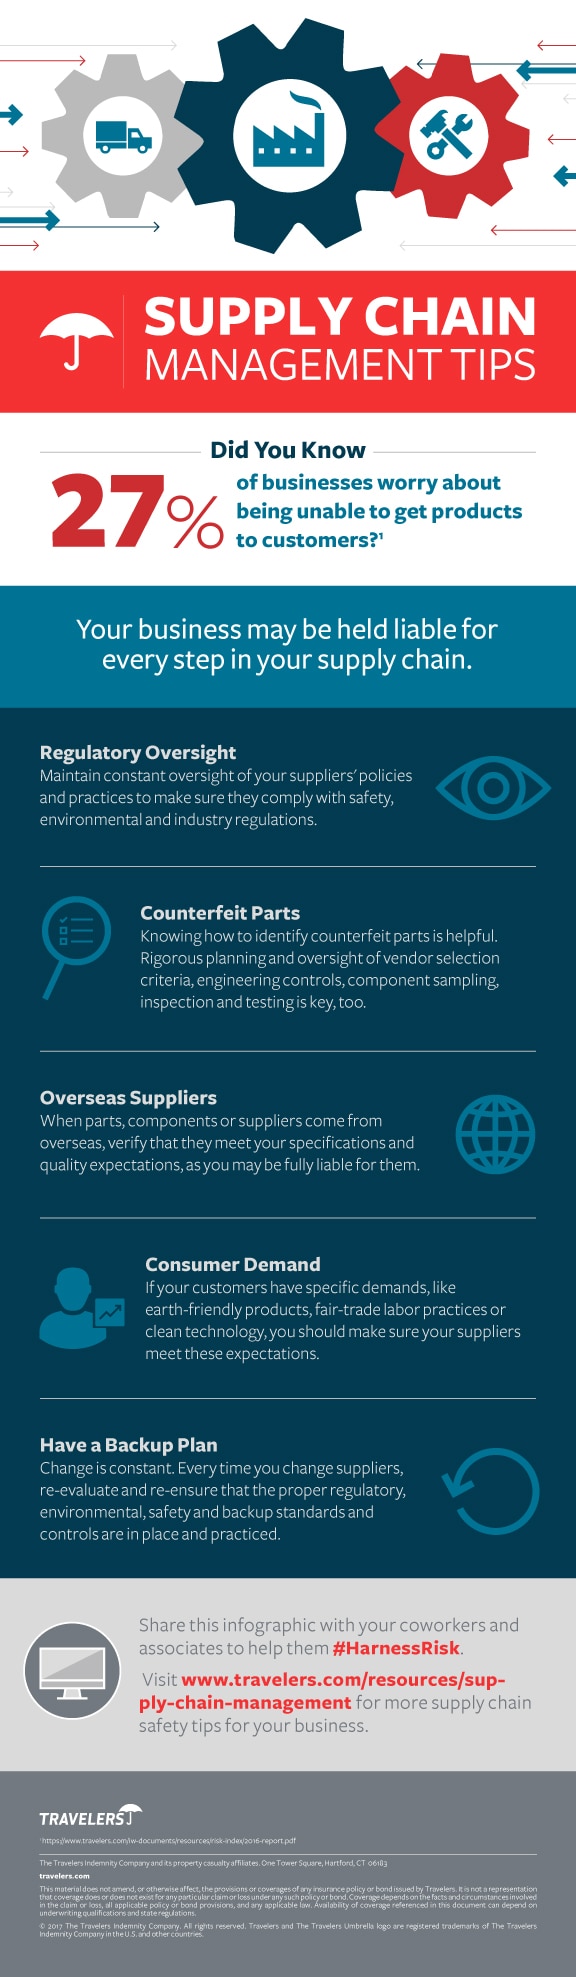 Supply chain management tips infographic